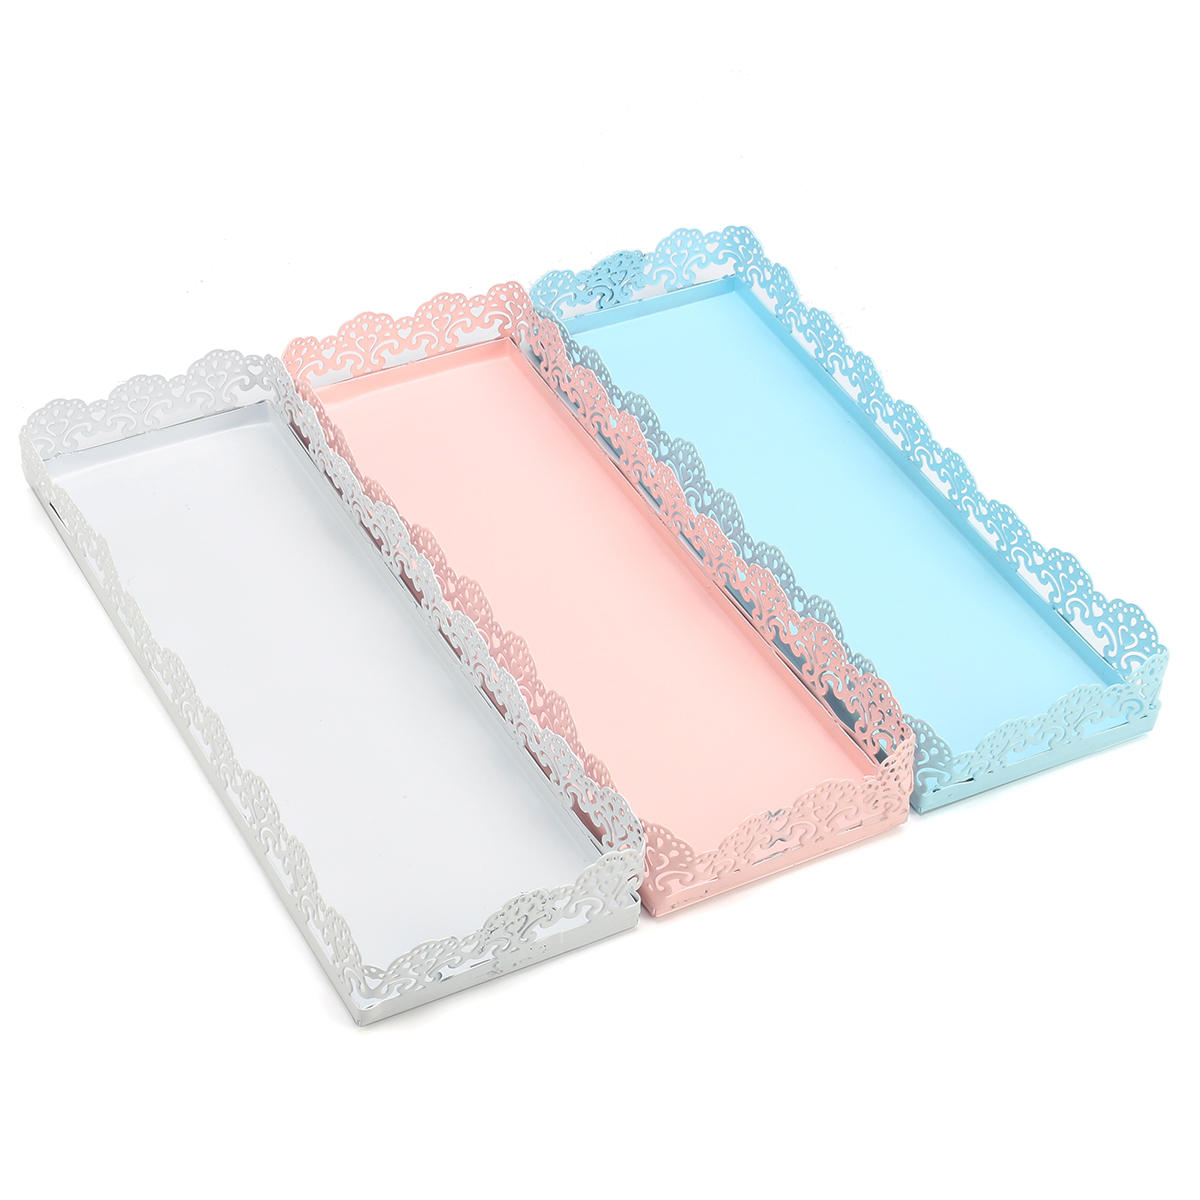 

Rectangle Cake Pan Stand Dessert Pastry Tray Wedding Banquet Cupcake Holder Display